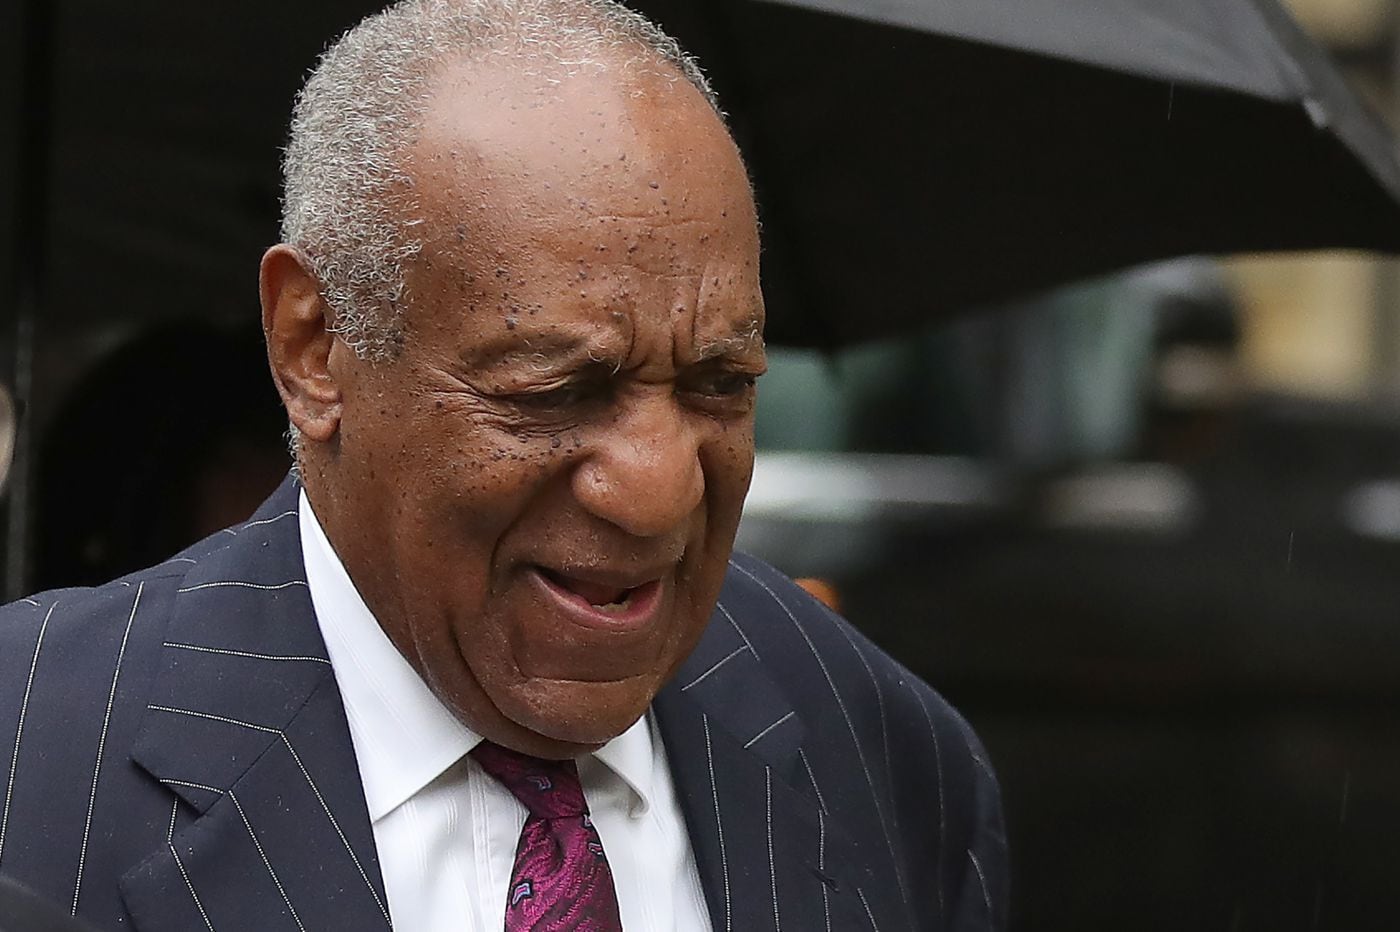 Bill Cosby loses bid to overturn his sexual assault conviction